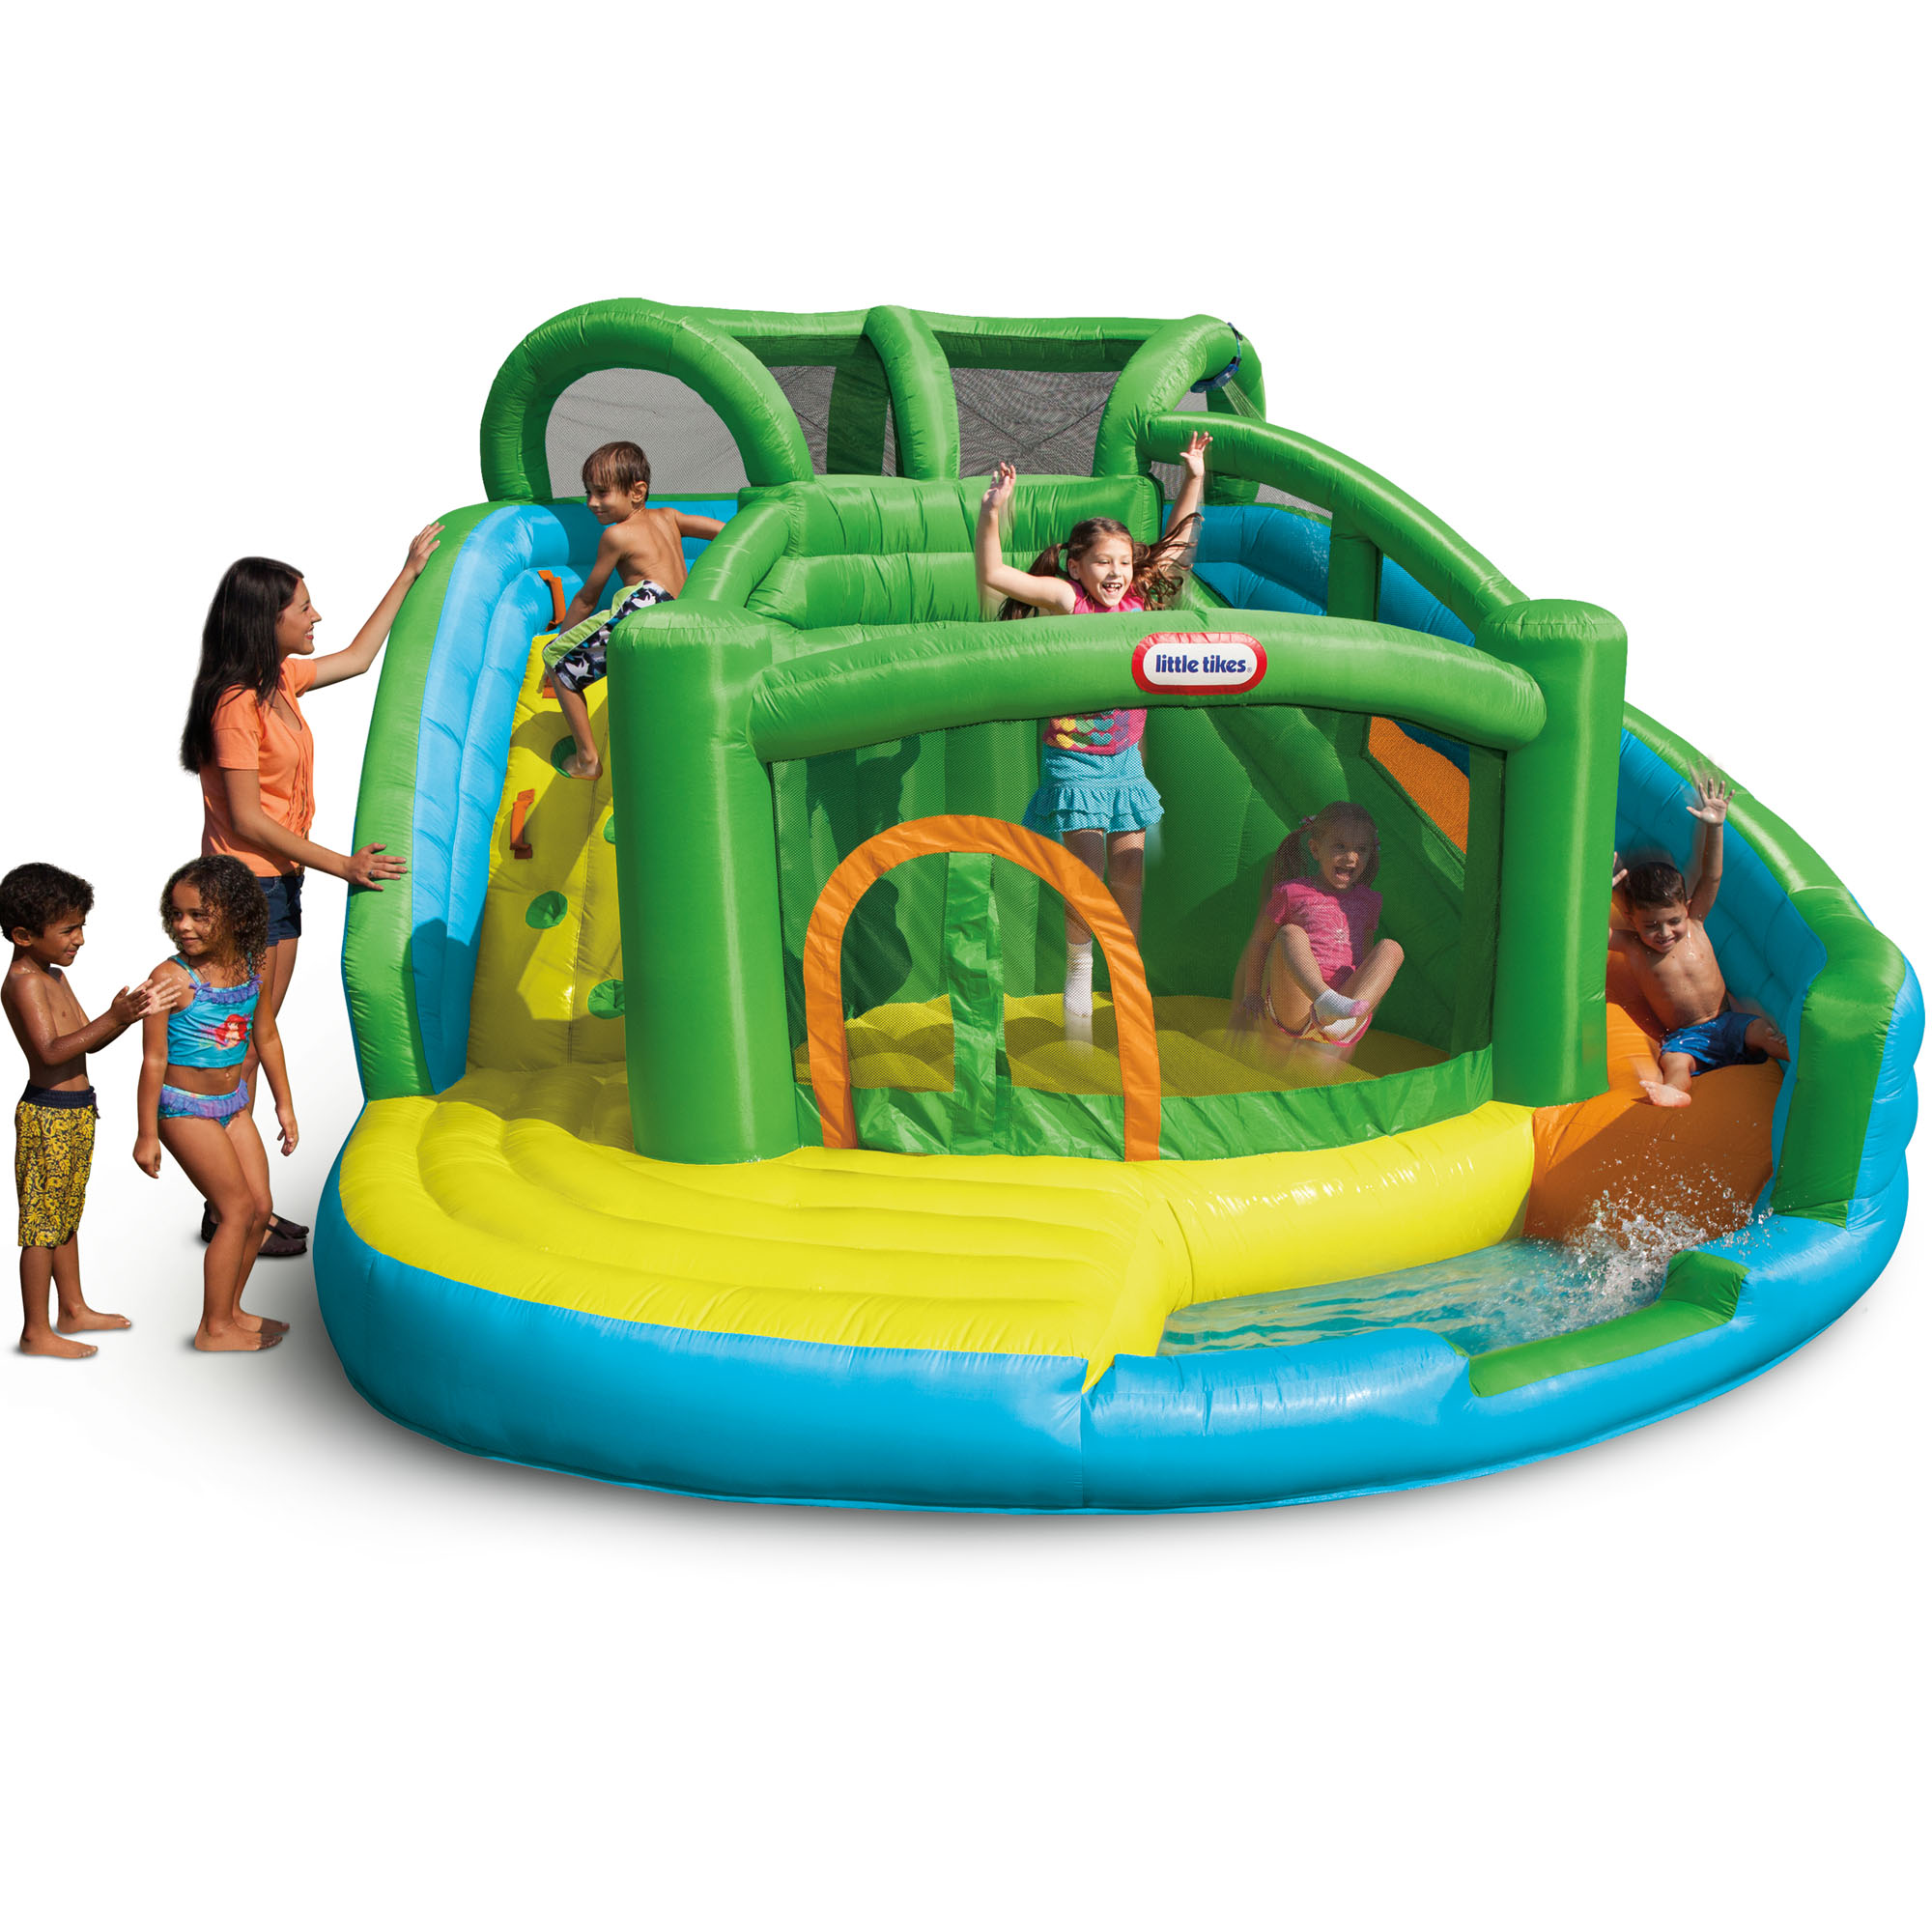 Little Tikes 2-in-1 Wet 'n Dry Inflatable Water Park with 2 Water Slides and Bounce House Including Blower, Kids Outdoor Backyard Playground Toy, Fits up to 4 Kids, Boys Girls Ages 3 4 5+ - image 1 of 6